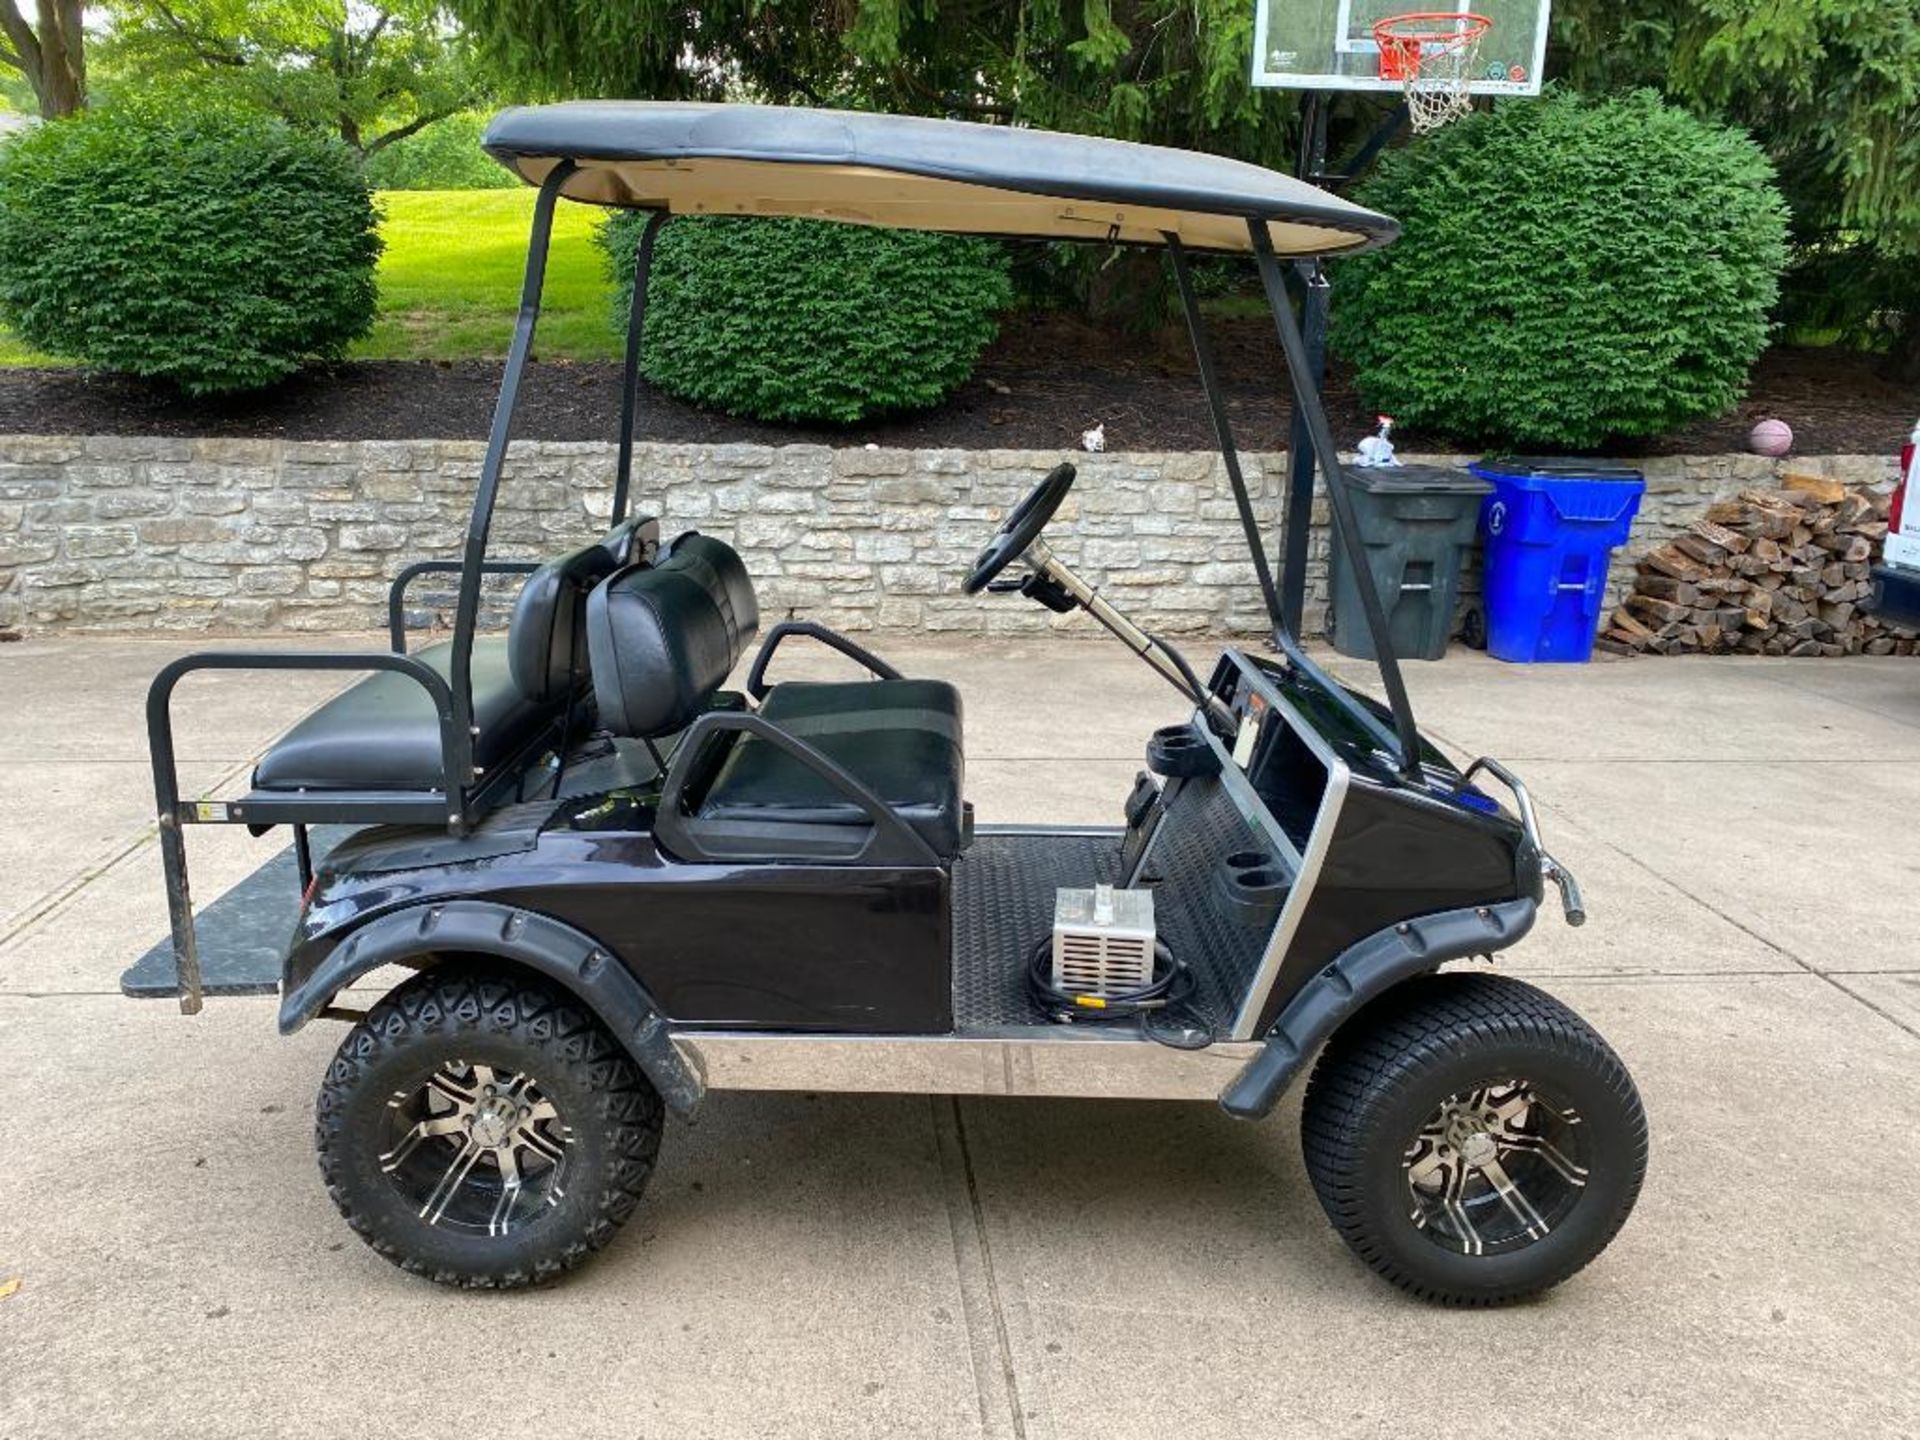 CLUB CAR ELECTRIC GOLF CART, BATTERIES LESS THAN A YEAR OLD, 48V, ALL SPORTS LIFT KIT, AFTERMARKET W - Image 3 of 6